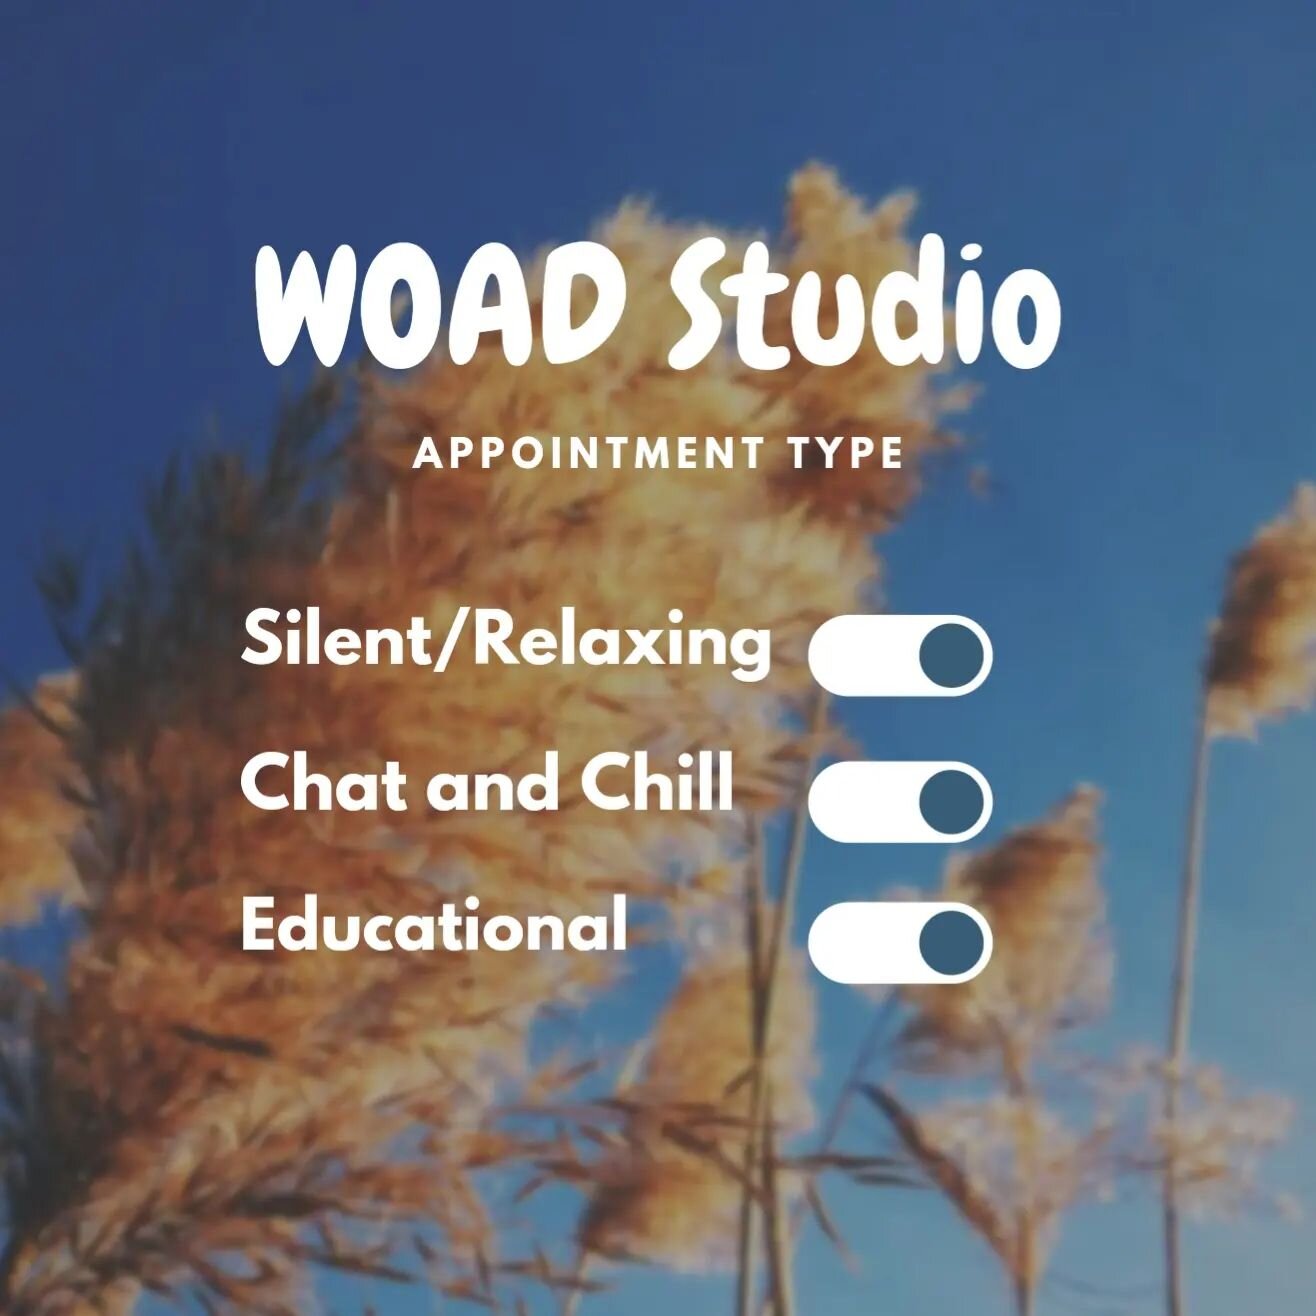 Did you know that you can select what type of appointment you want, before even coming in?

You can pick one, or mix and match them to suit your mood 💆&zwj;♀️🗨️👩&zwj;🏫

Your visit will always be about you and your needs 🥰